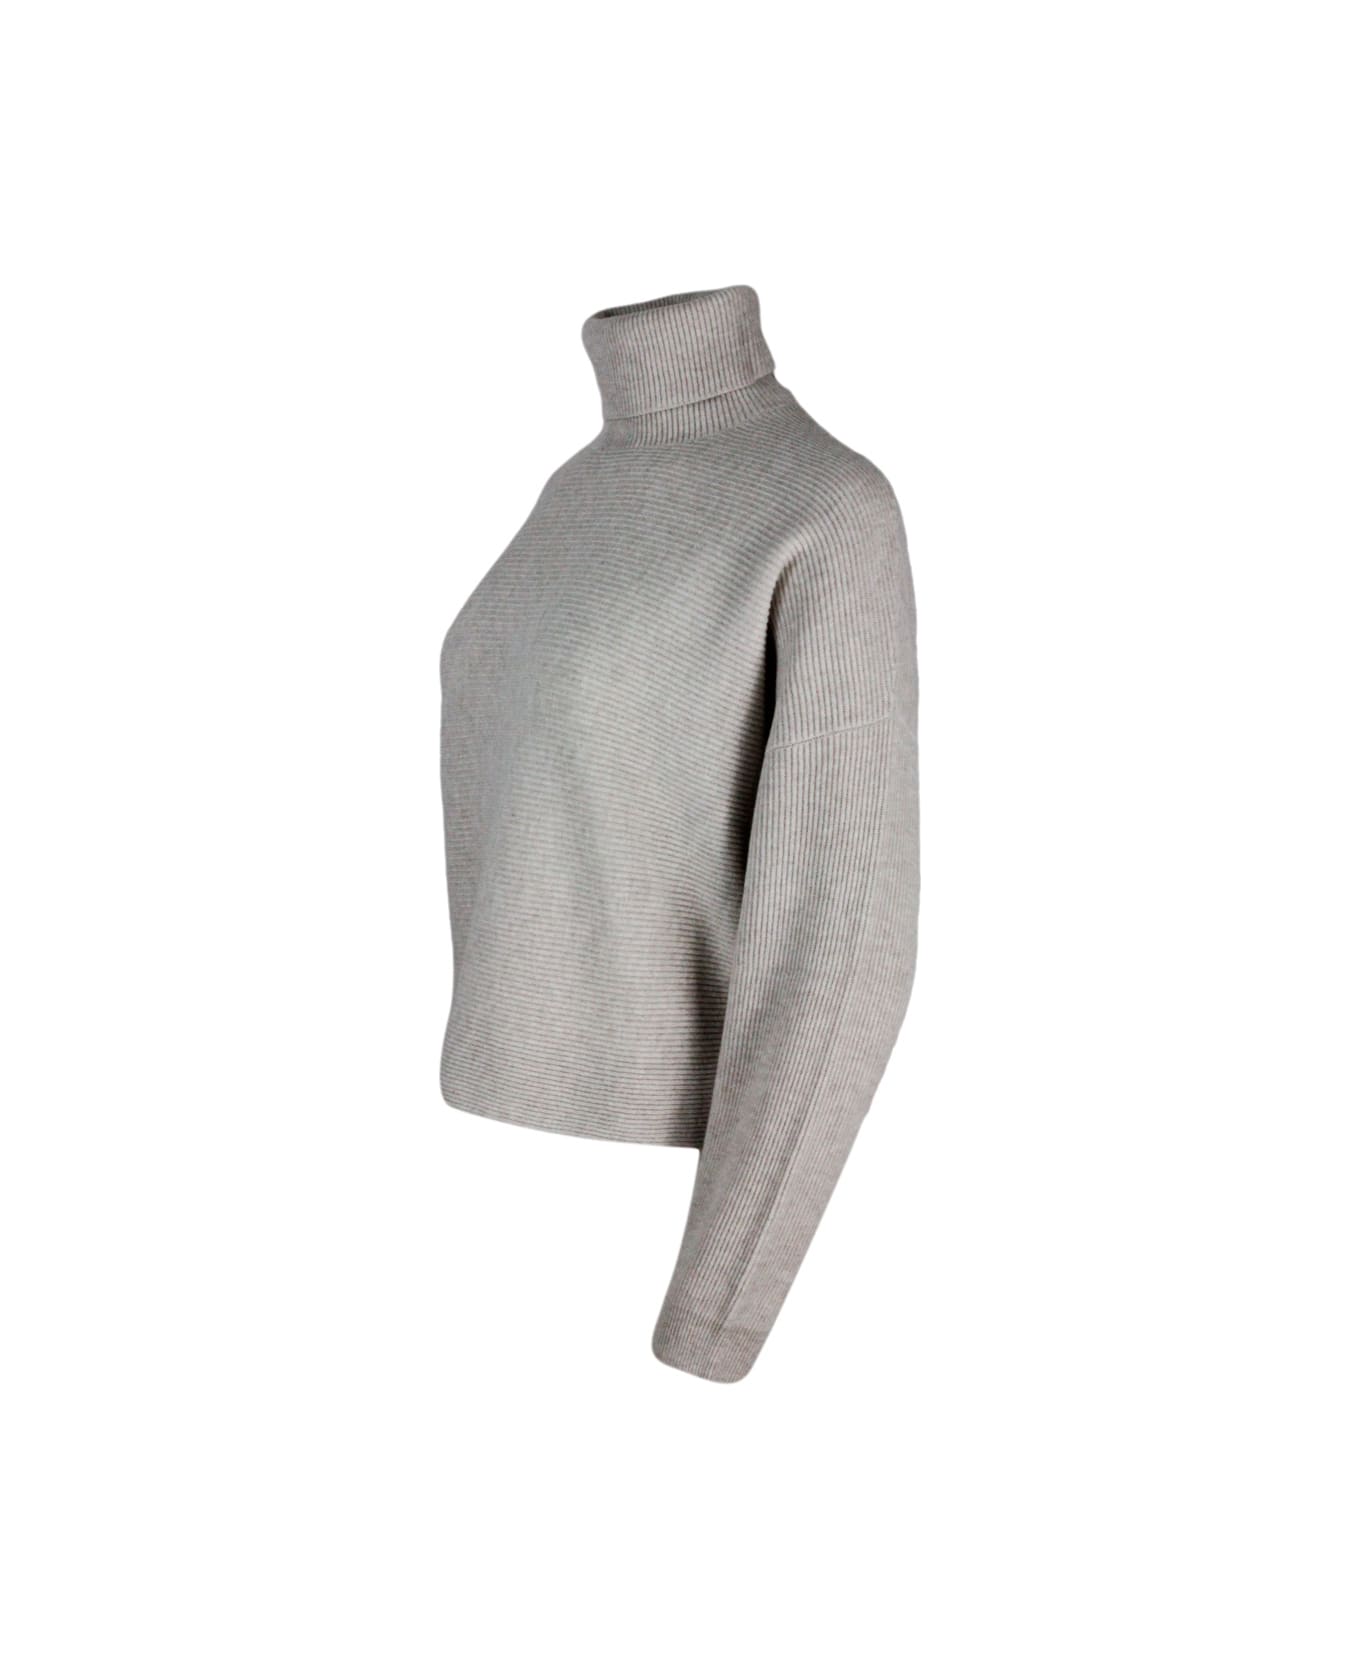 Brunello Cucinelli High Neck Sweater In Wool, Silk And Cashmere With English Rib Knit With Precious Shiny Monili On The Side Slits - Beige